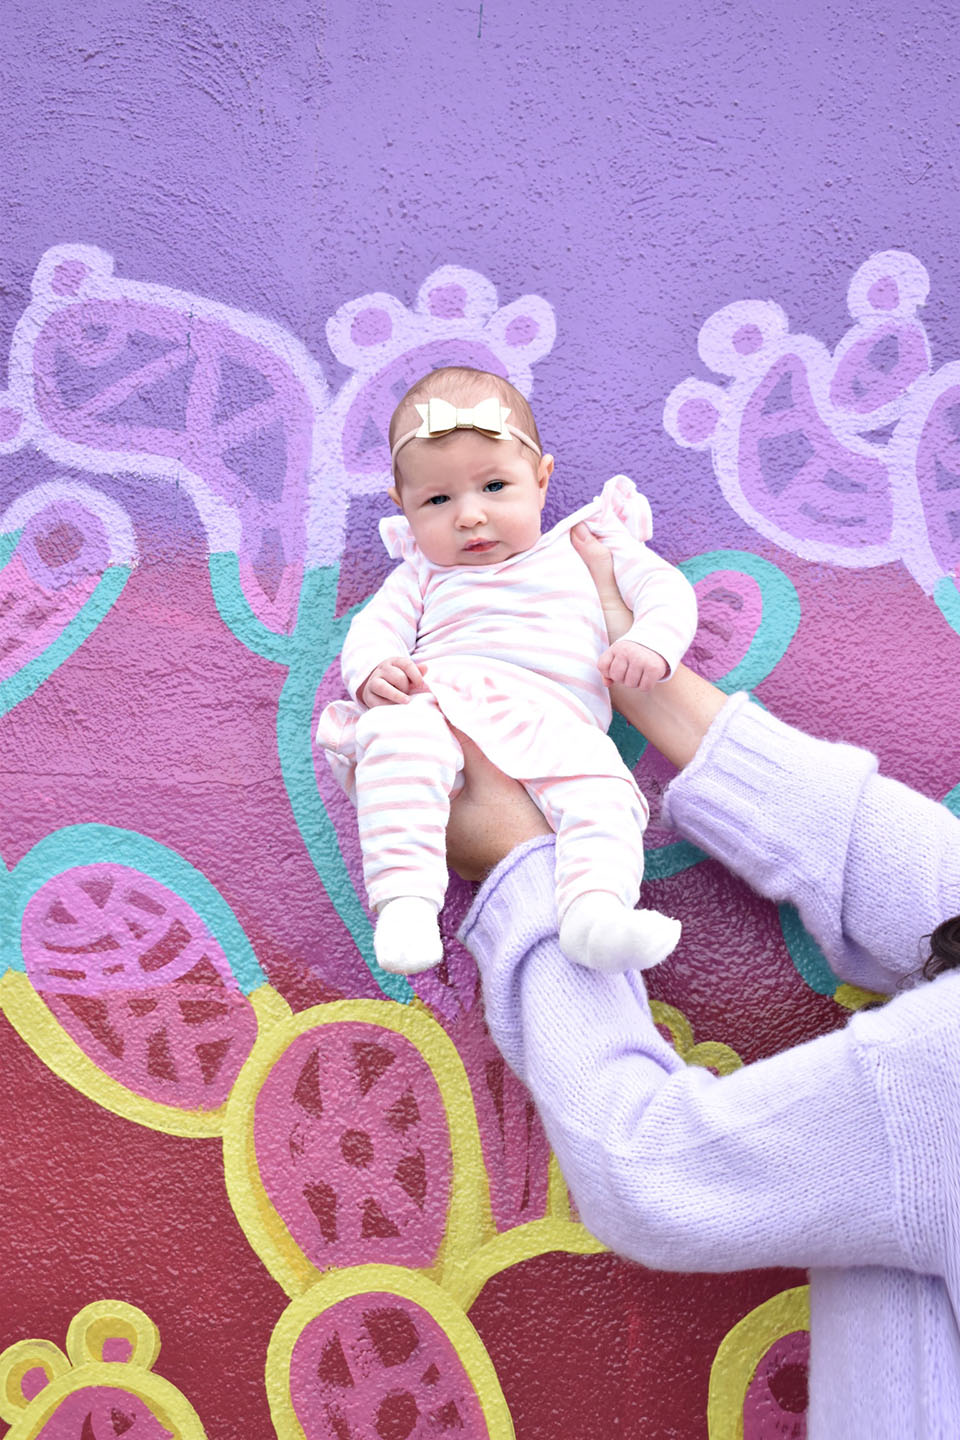 Collins Eliza wearing Rosie Pope baby at a Tallahassee street art wall.